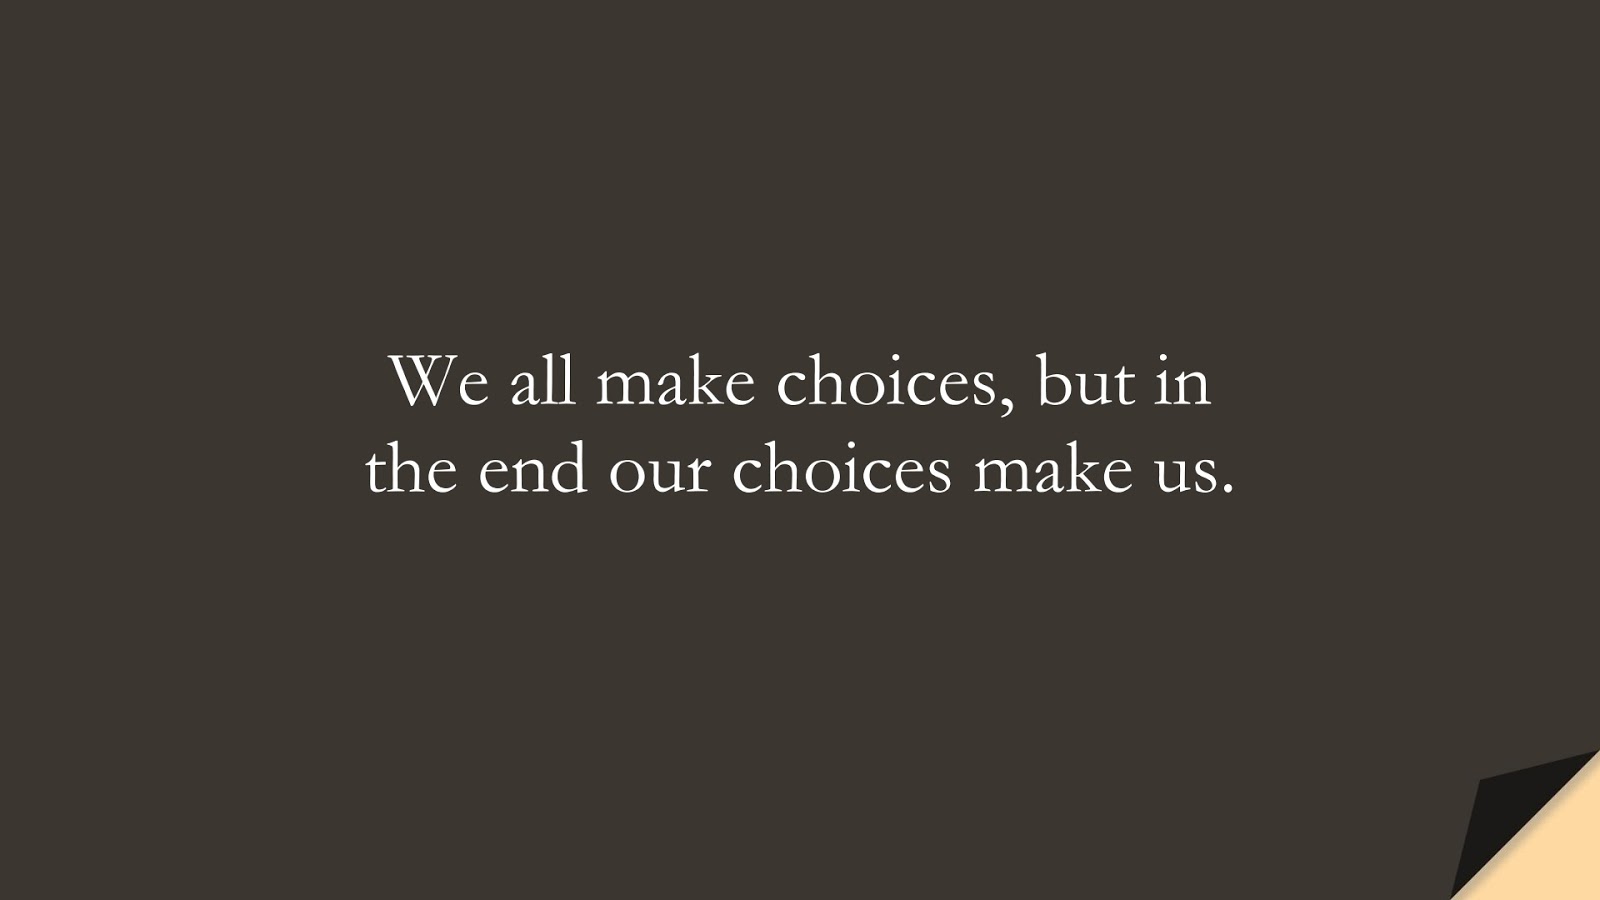 We all make choices, but in the end our choices make us.FALSE